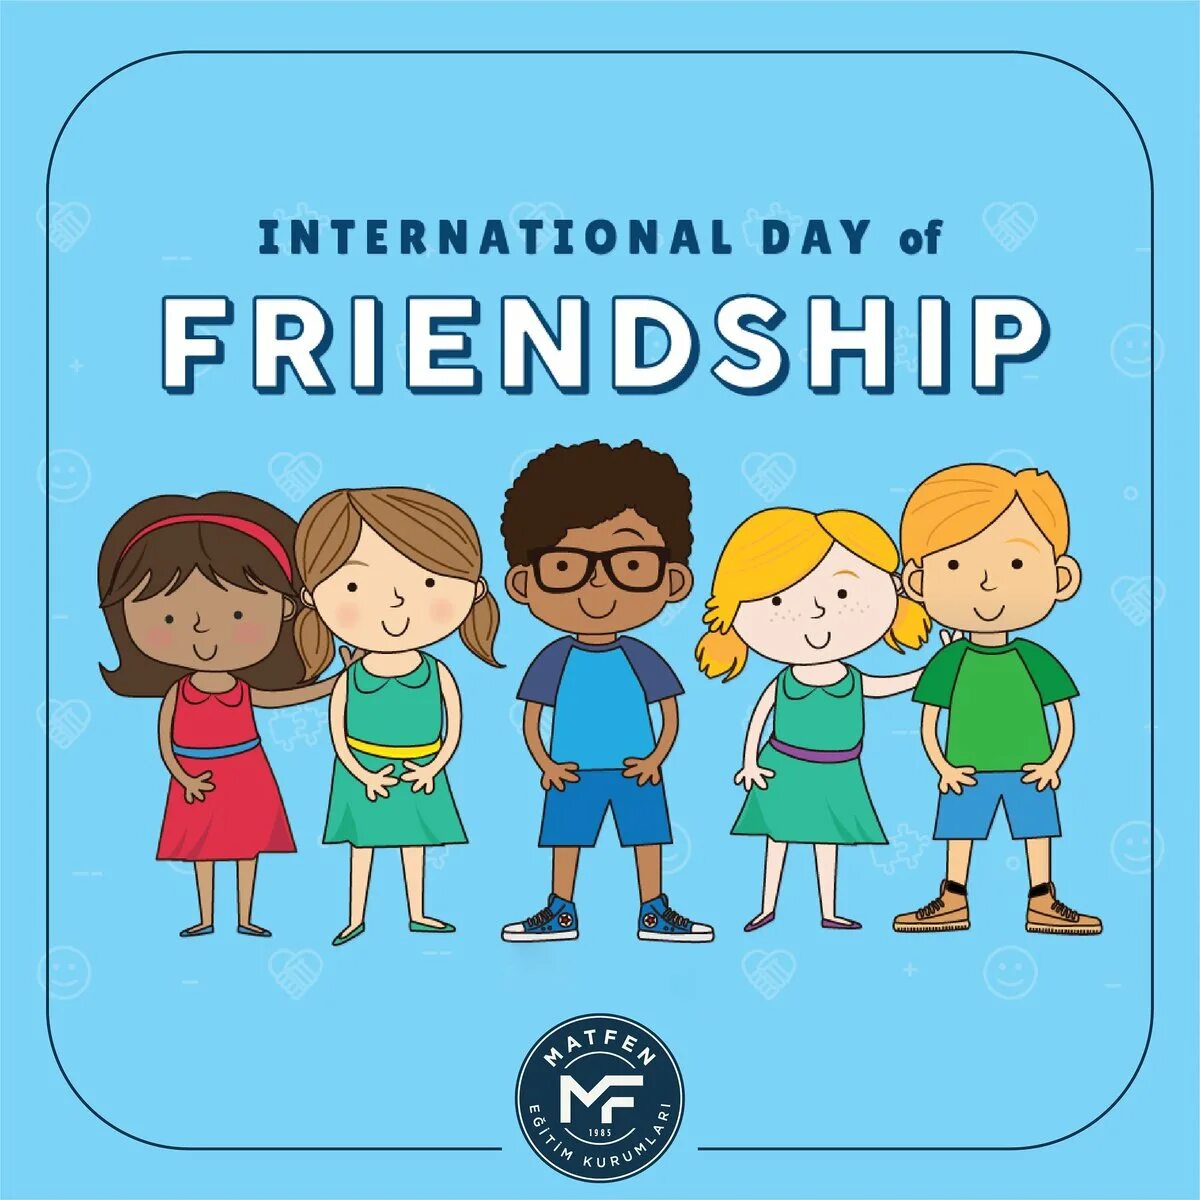 We your new friends. International friends Day. International friends Day 9 June. National Friendship Day. Happy International Friendship Day.